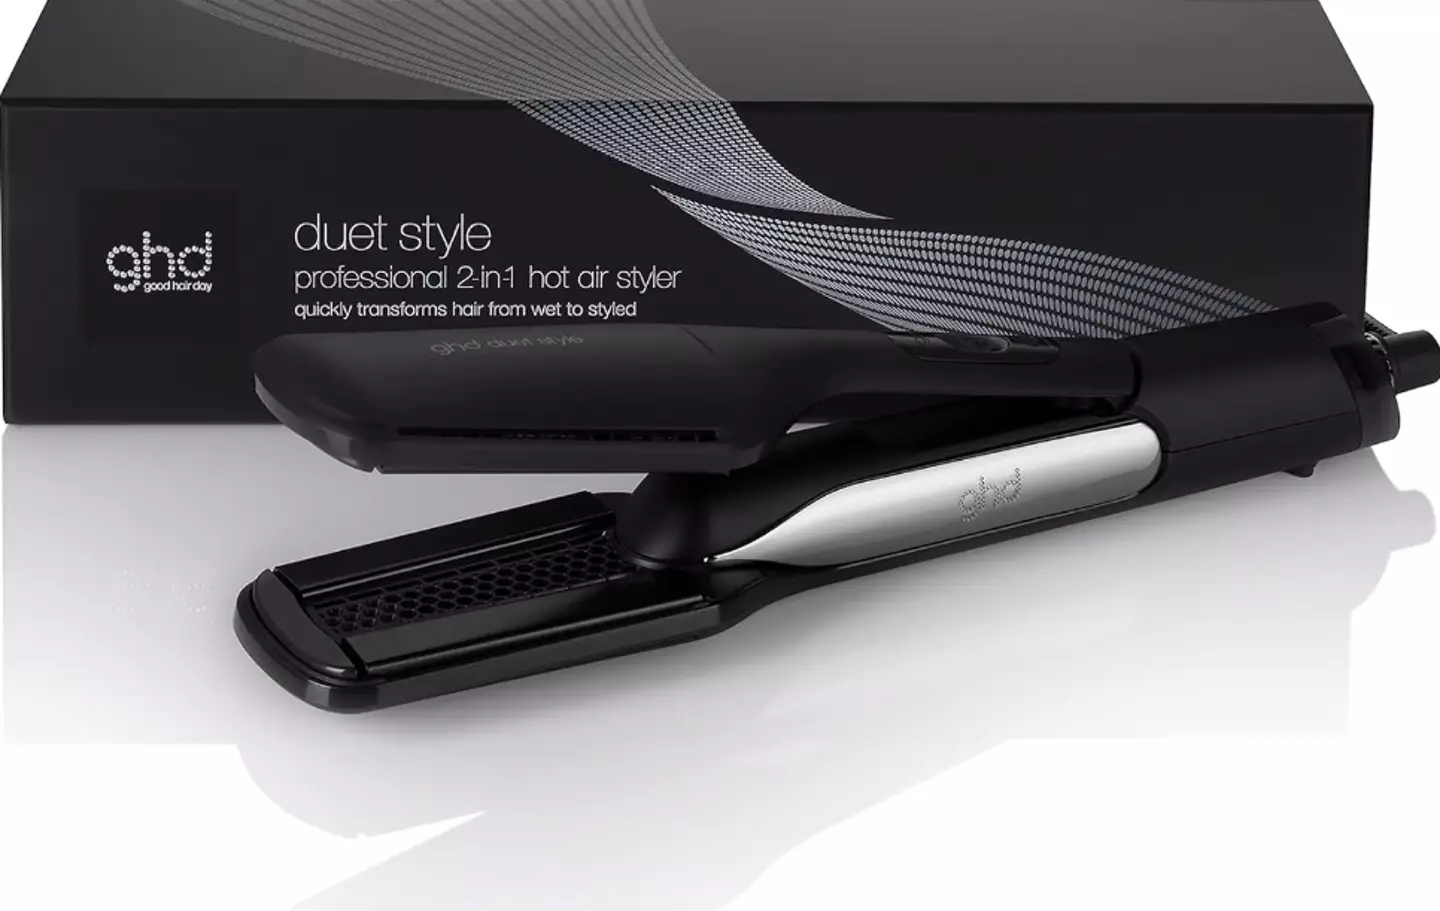 There's over £60 off the Duet Styler in the Amazon spring sale.